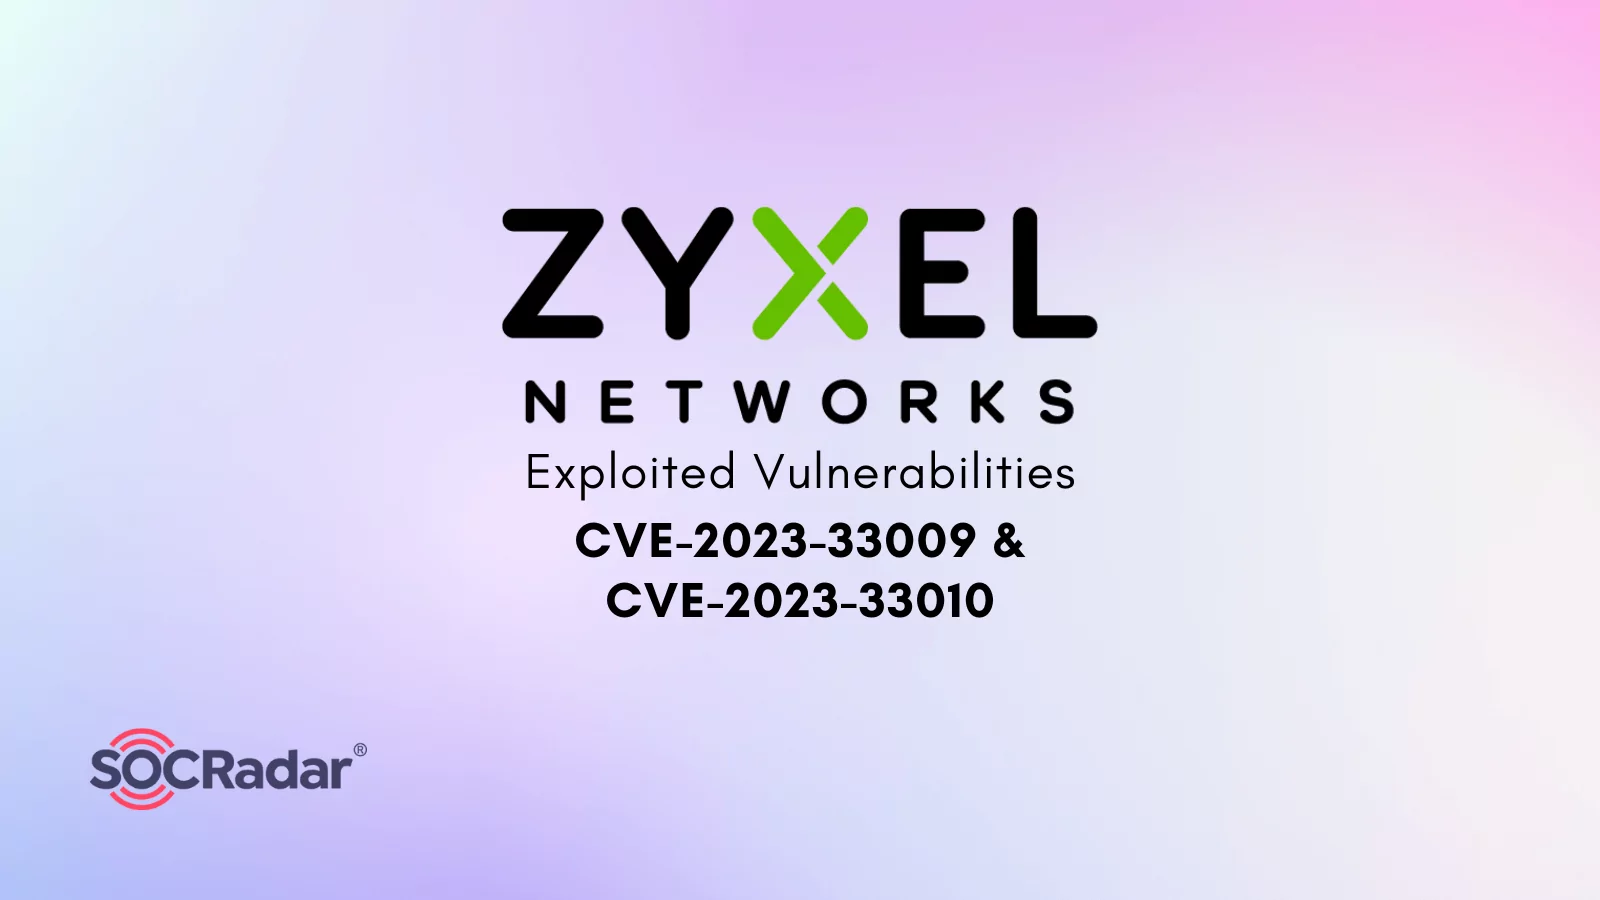 Hackers are using unknown user accounts to target Zyxel firewalls